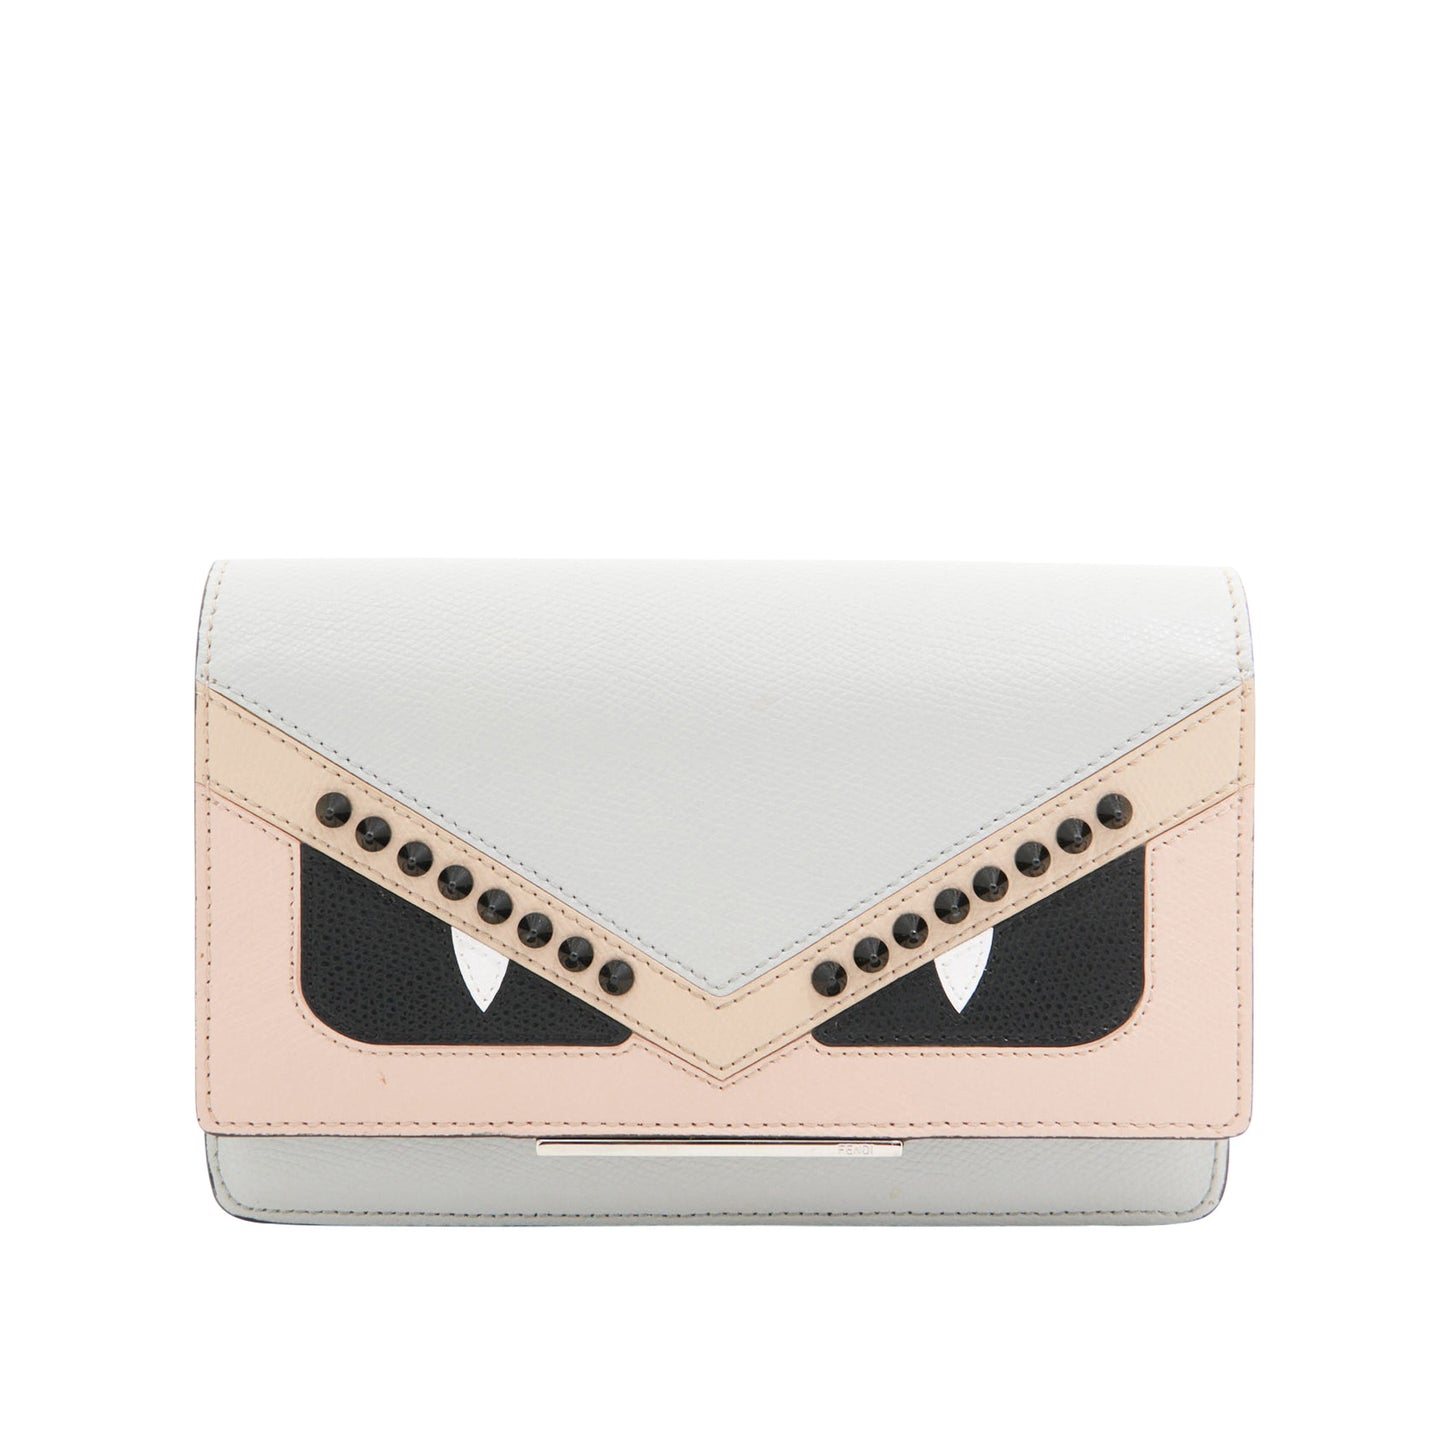 Fendi Leather Monster Wallet on Chain in Grey and Pink SHW